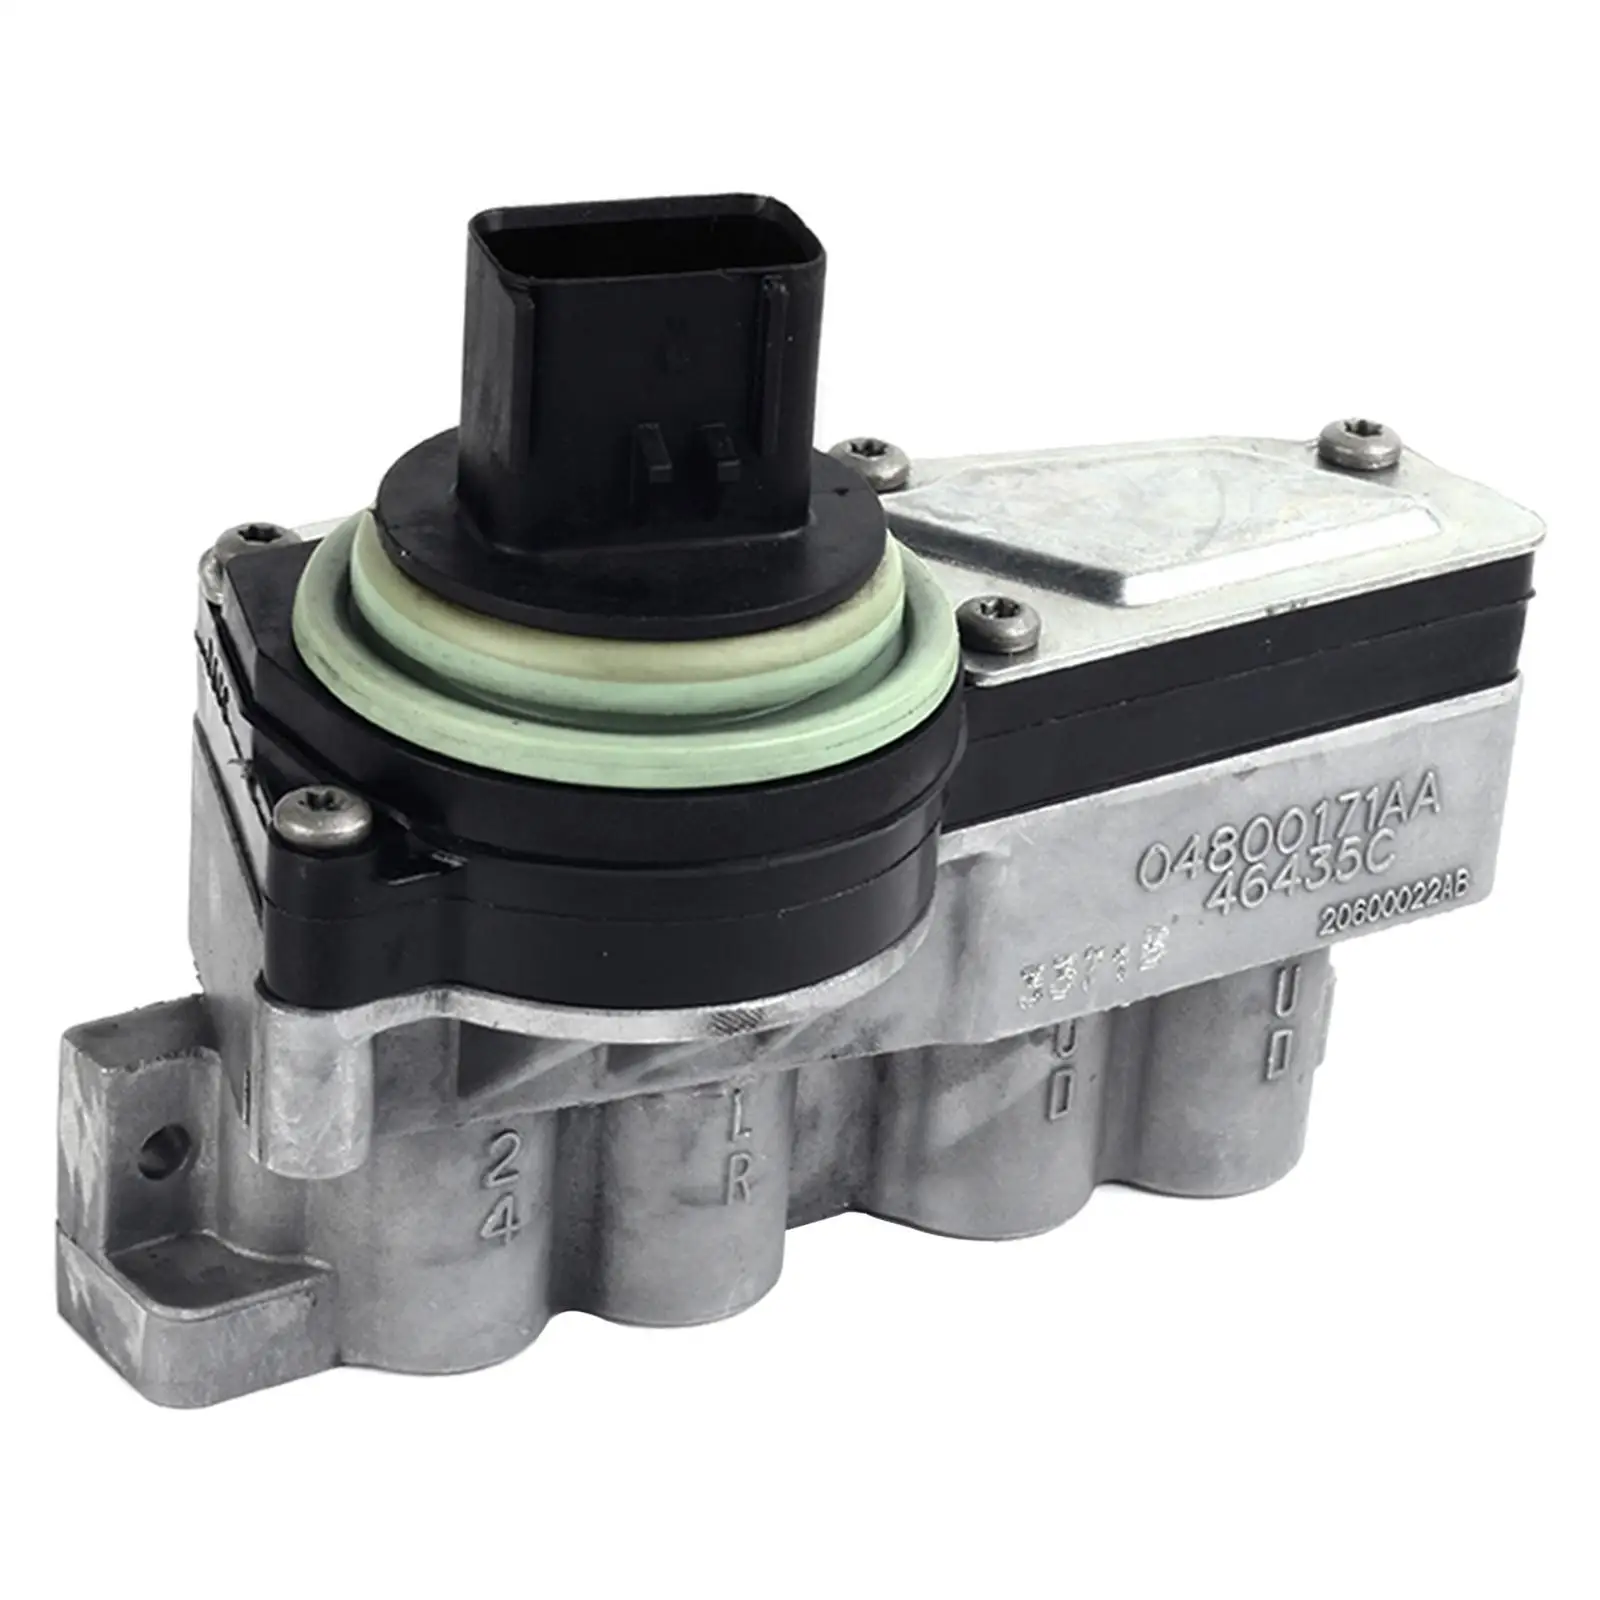 Transmission Solenoid Block, 04800171AA Replaces Automotive  Install ,Car Solenoid Pack Fits for   2011